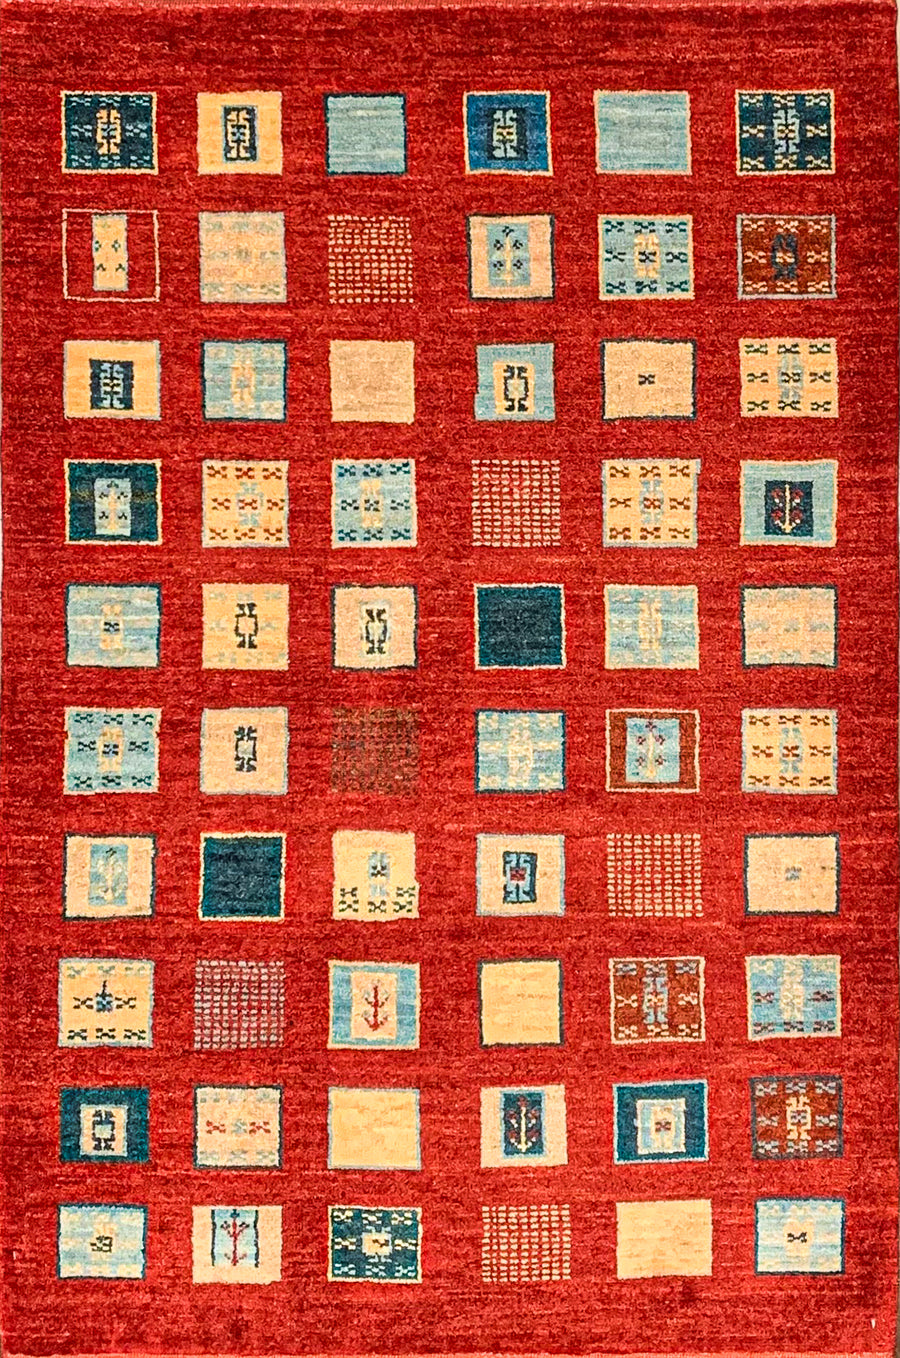 Rustic Tribal Gabbeh Throw Rug With Several Squares of Various Colors and Designs on a Field of Red Wool.